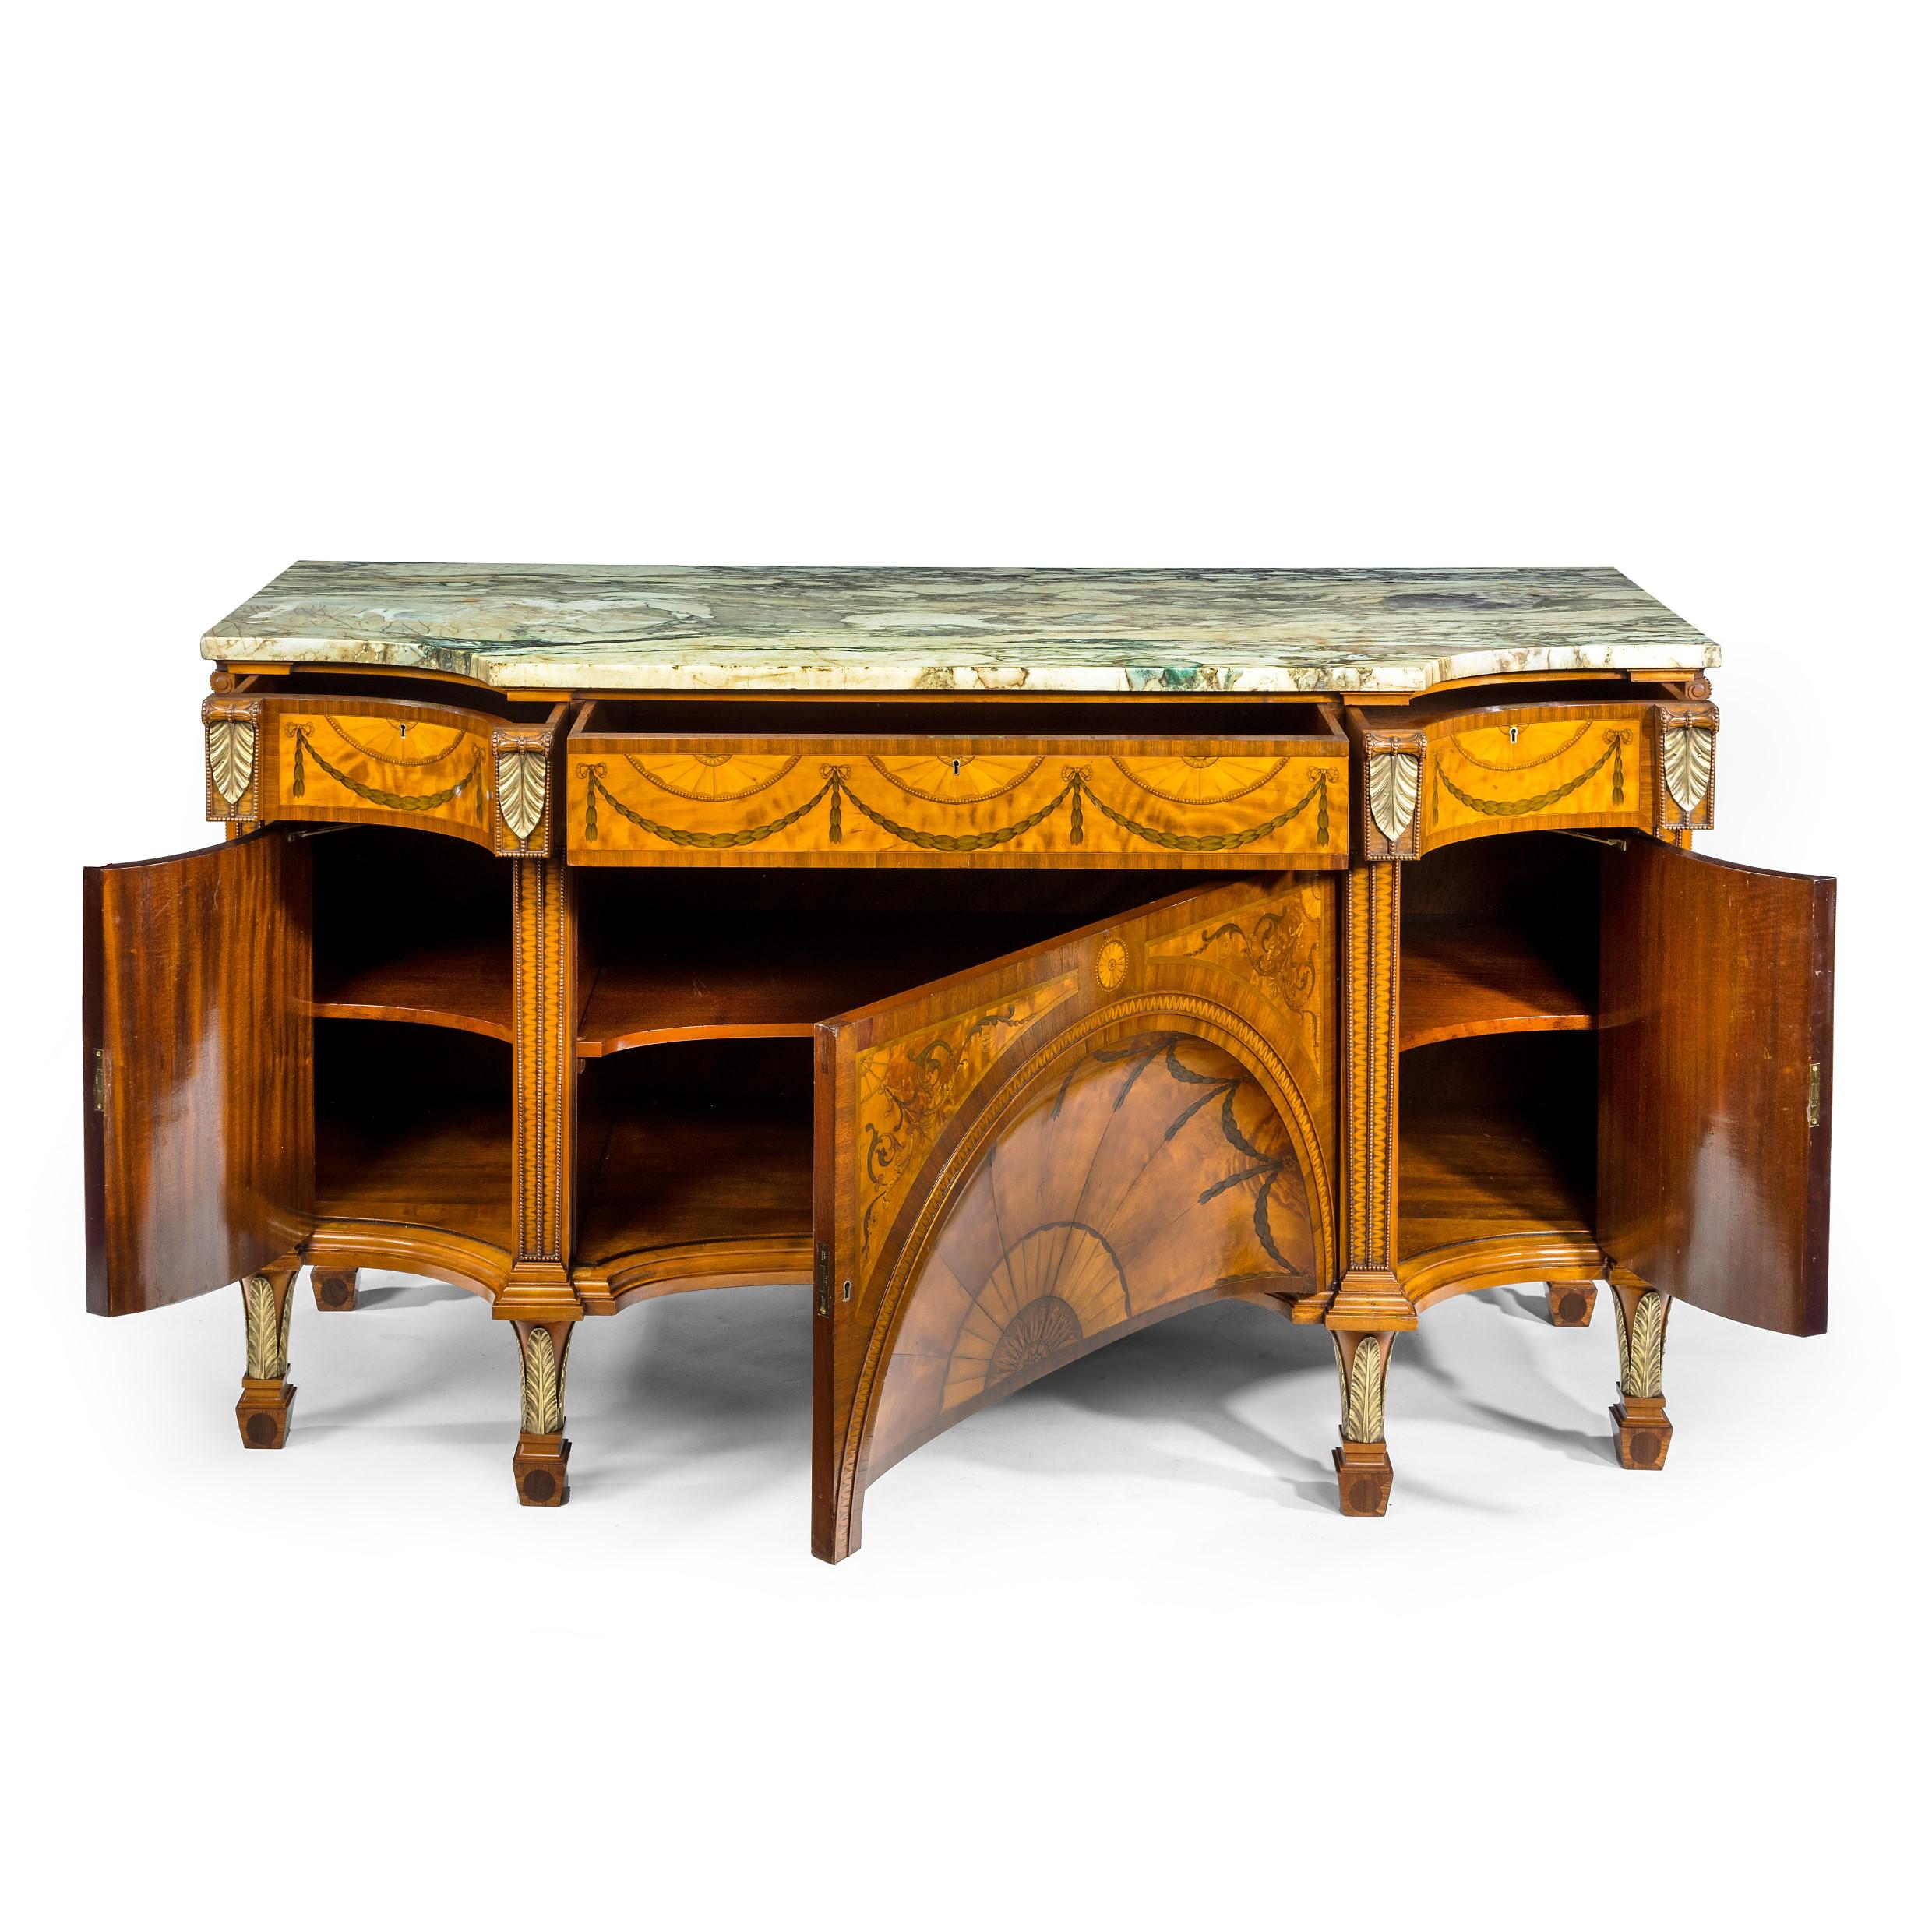 An Exceptional Edwardian Satinwood Commode, Reproducing Thomas Chippendale’s Piece-Known as the Diana and Minerva Commode-Supplied to the Lascelles Family at Harewood House

A satinwood Sheraton Revival breakfront marquetry commode, the shaped